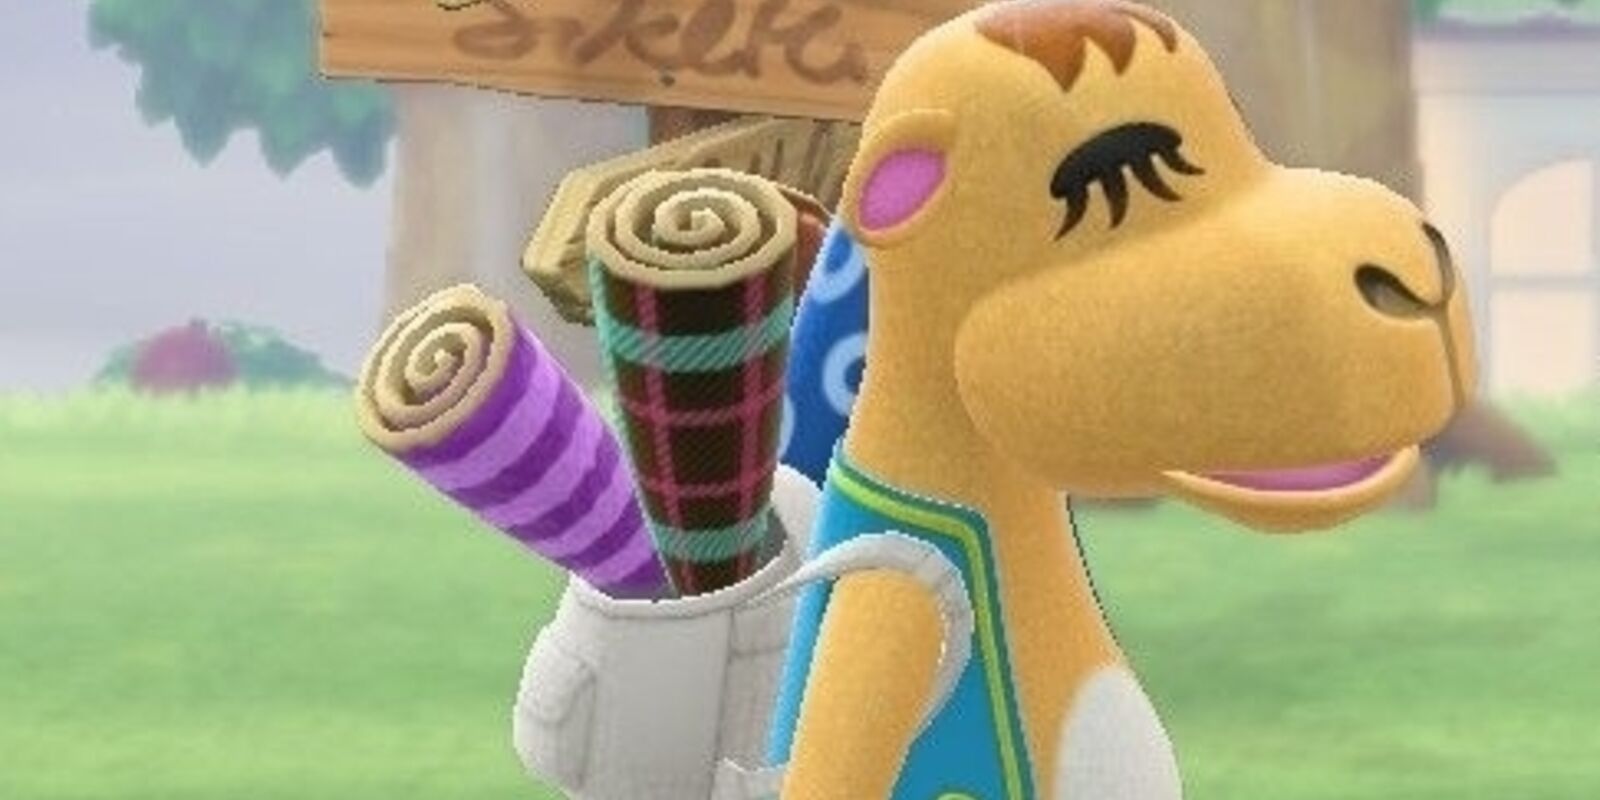 Saharah from Animal Crossing: New Horizons carrying wallpaper, flooring, and rugs in her backpack.